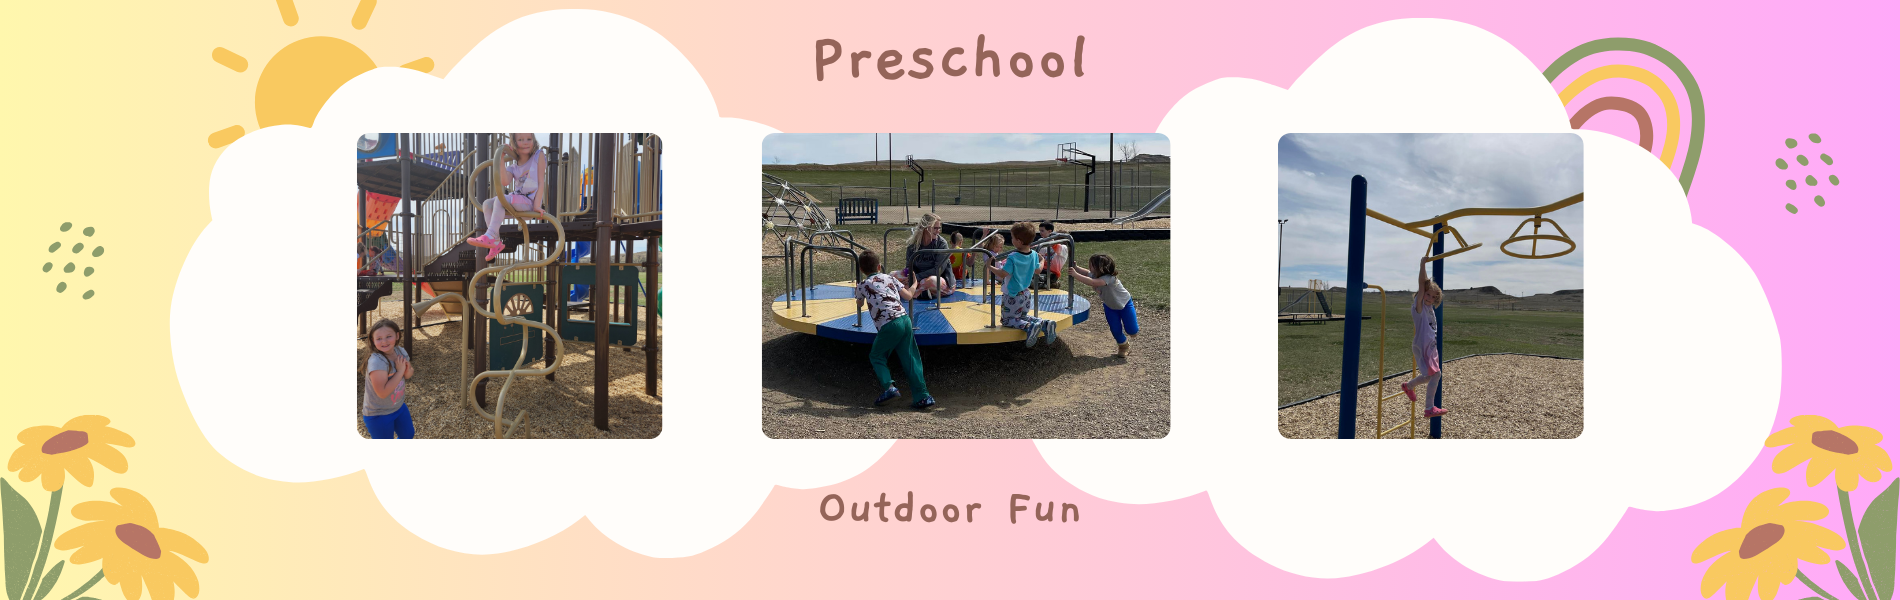 images of students playing outside